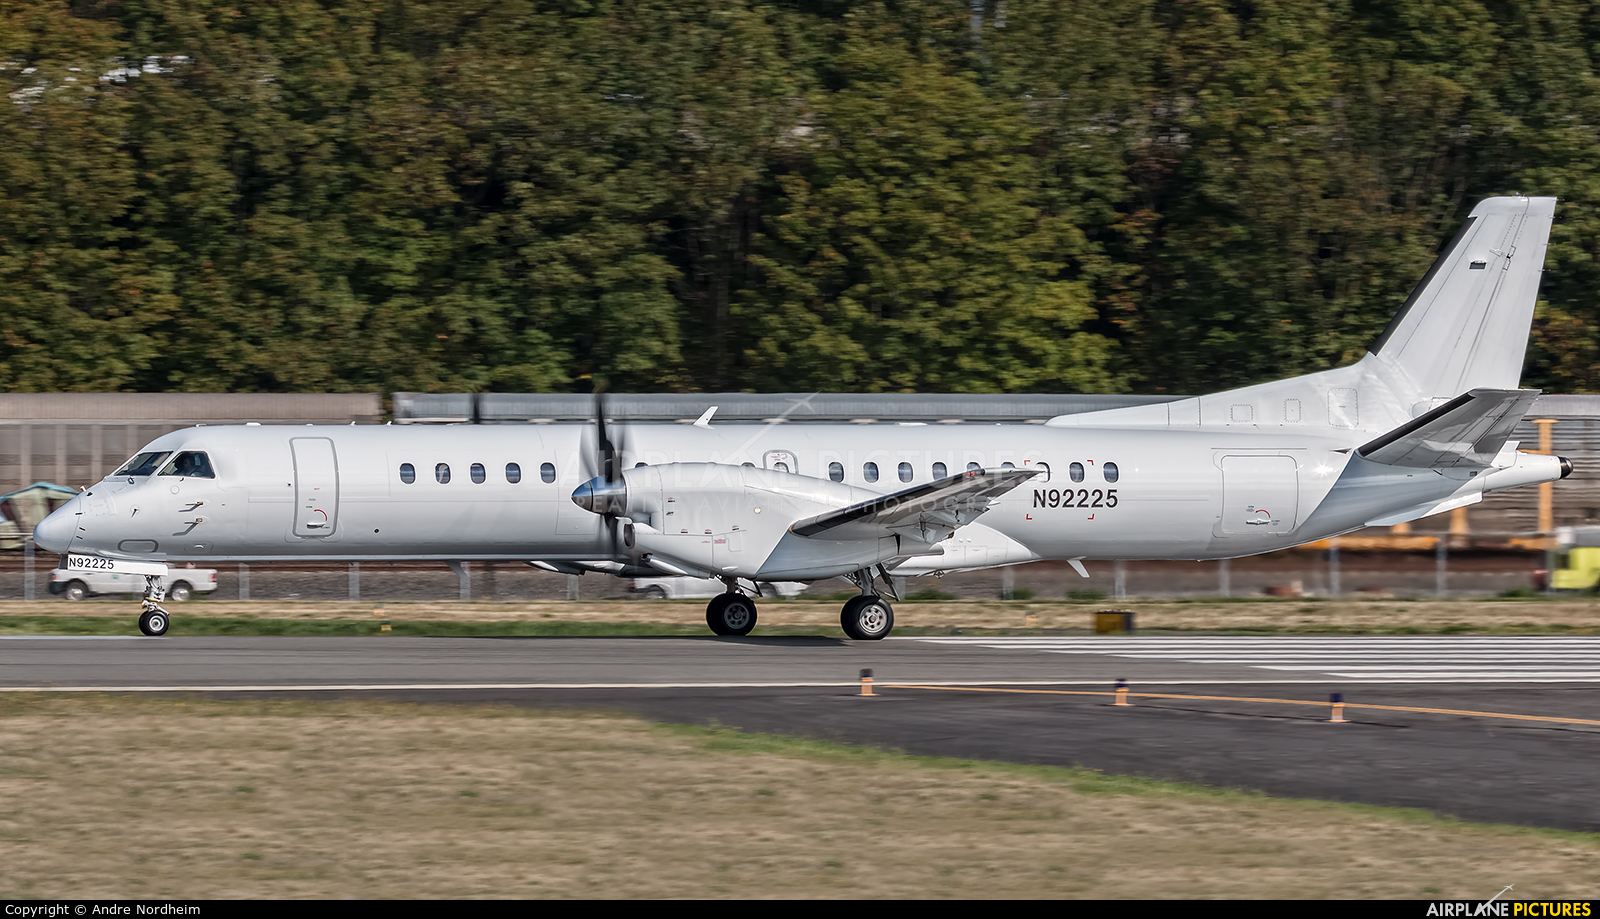 USA - Dept. of Justice N92225 aircraft at Seattle - Boeing Field / King County Intl